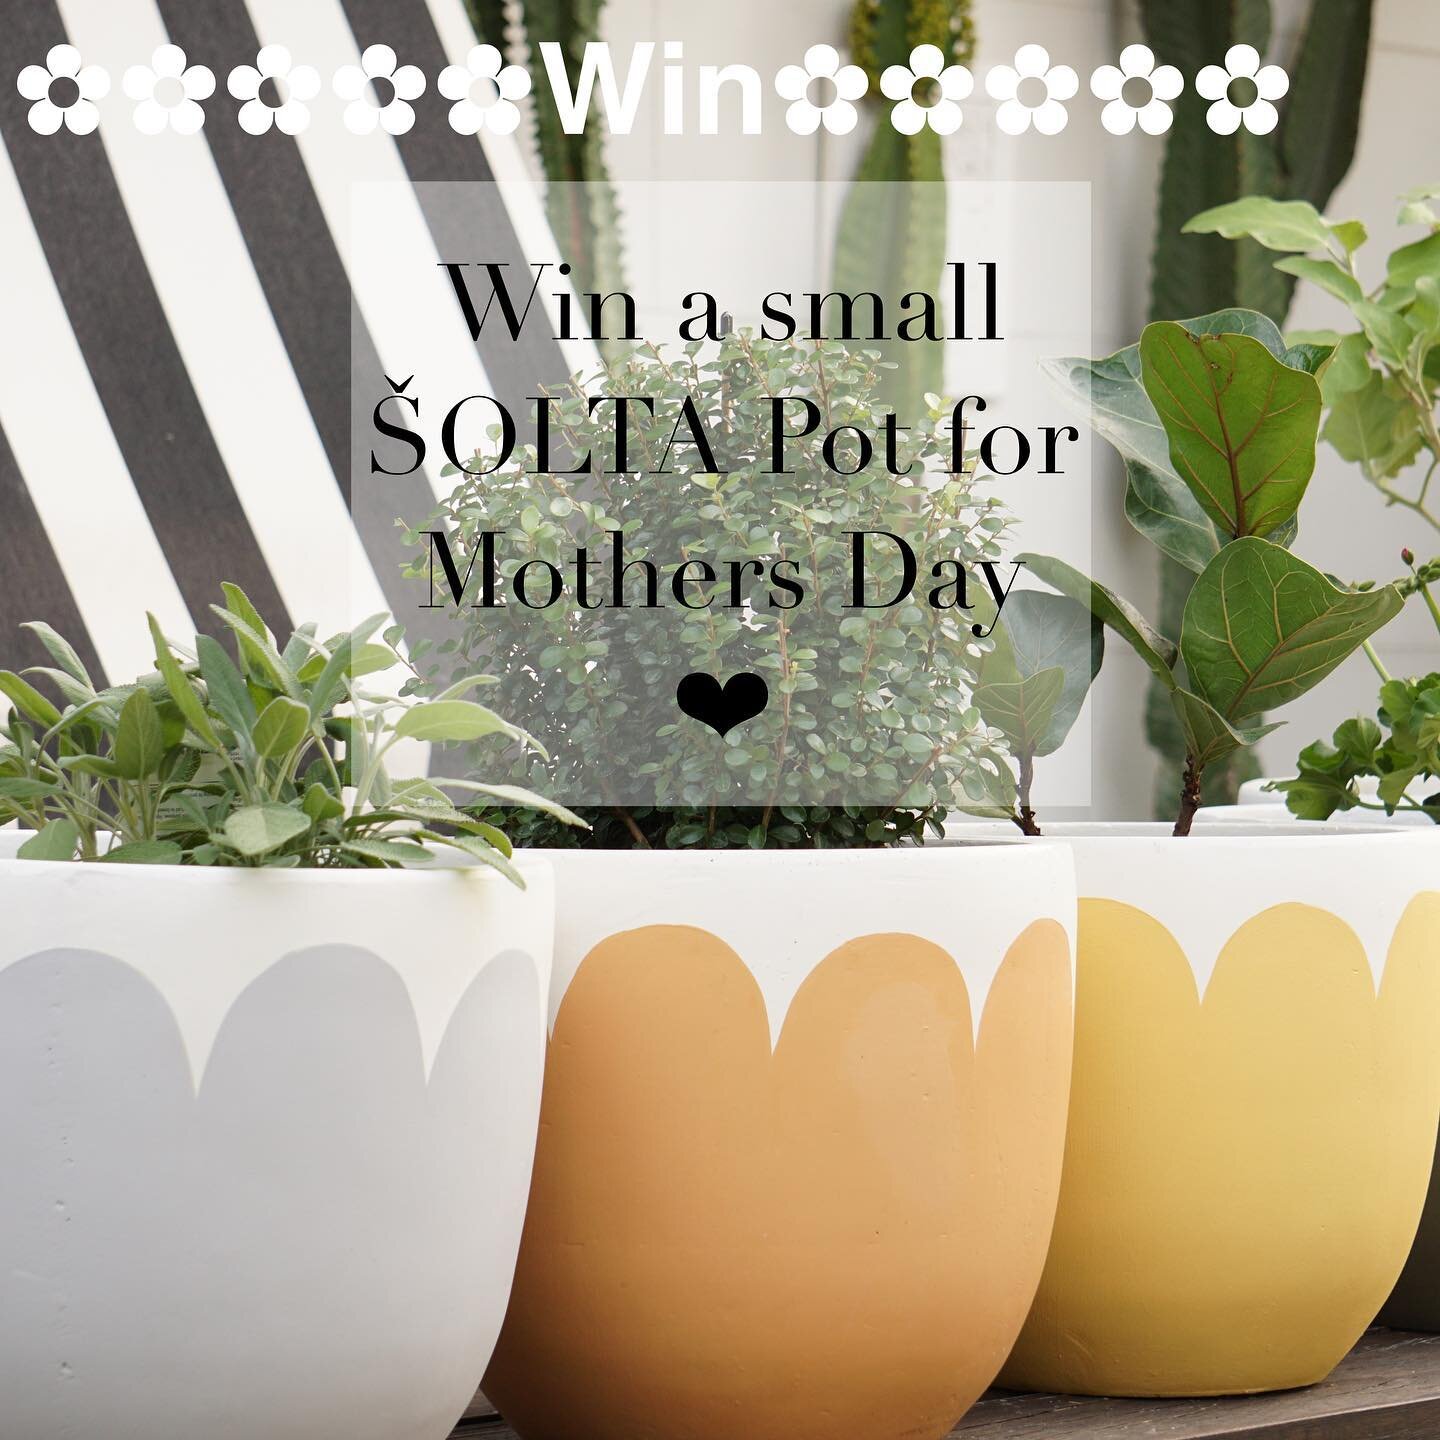 We would like to spoil you or your mother this Mother&rsquo;s Day.
We are giving away a small @solta_pots of your choice valued at $155

HOW TO WIN❓

1 ❤️Like this post 

2 ▶️Follow @solta_pots

3 🌀Tag in comments below anyone you think would like a